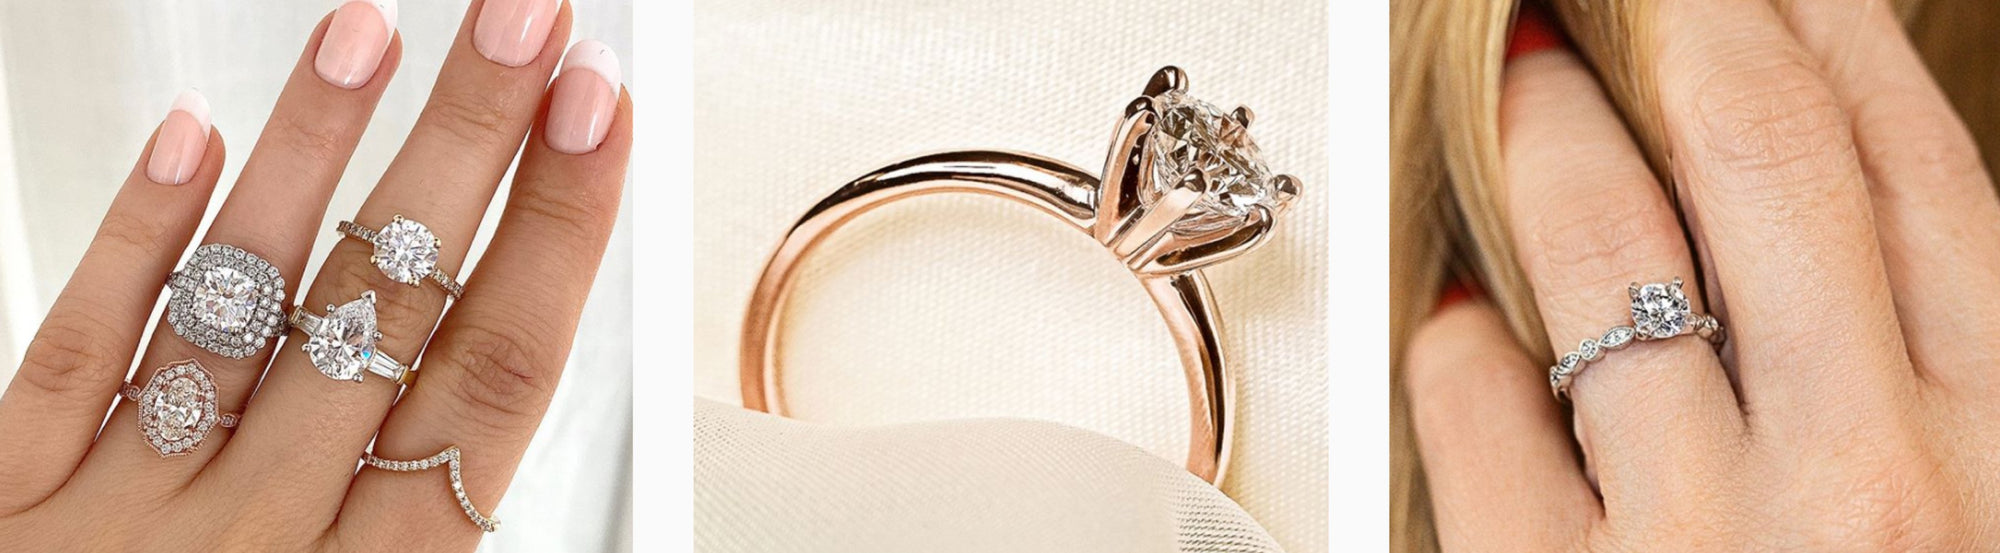 Conflict Free Engagement Rings that Inspire - Top 6 Trending Instagram Photos